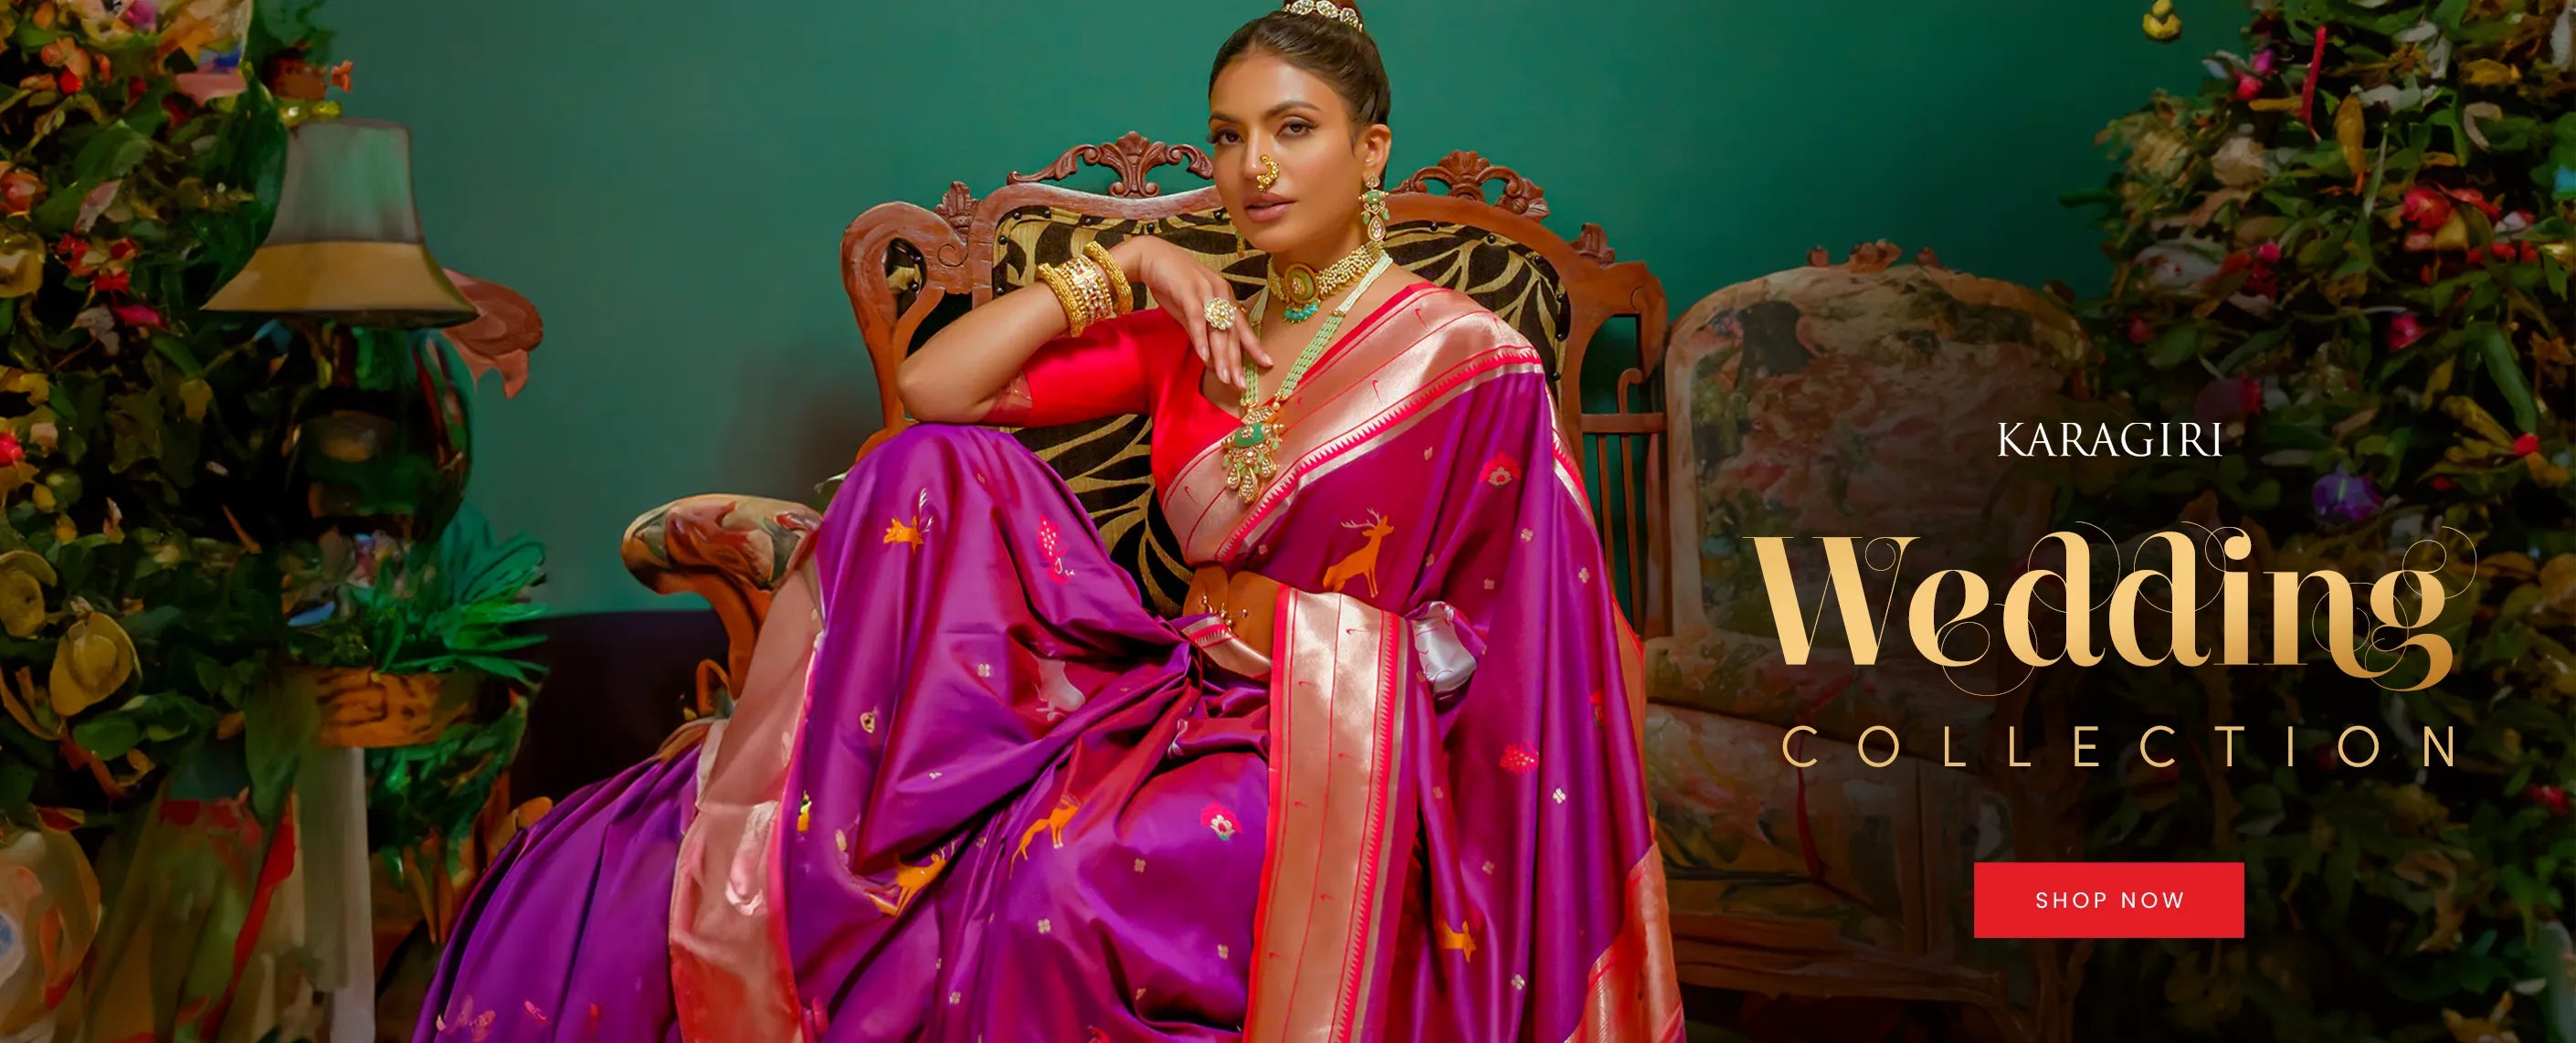 6 Indian Bridal Saree A Must Pick For All Indian Brides | Lovevivah  Matrimony Blog